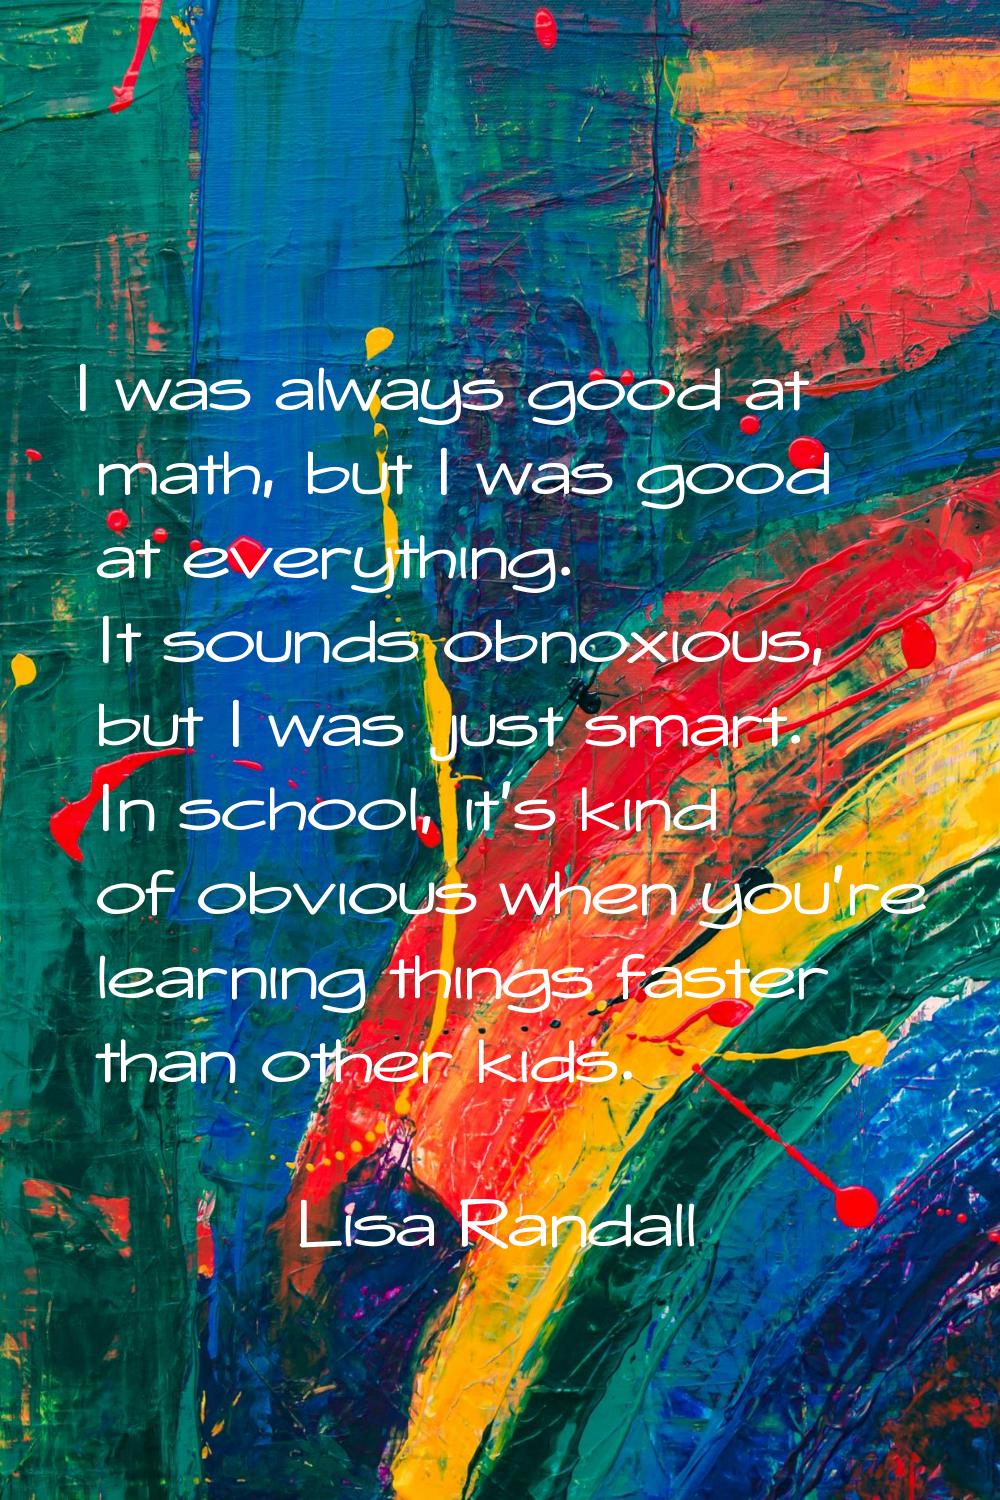 I was always good at math, but I was good at everything. It sounds obnoxious, but I was just smart.